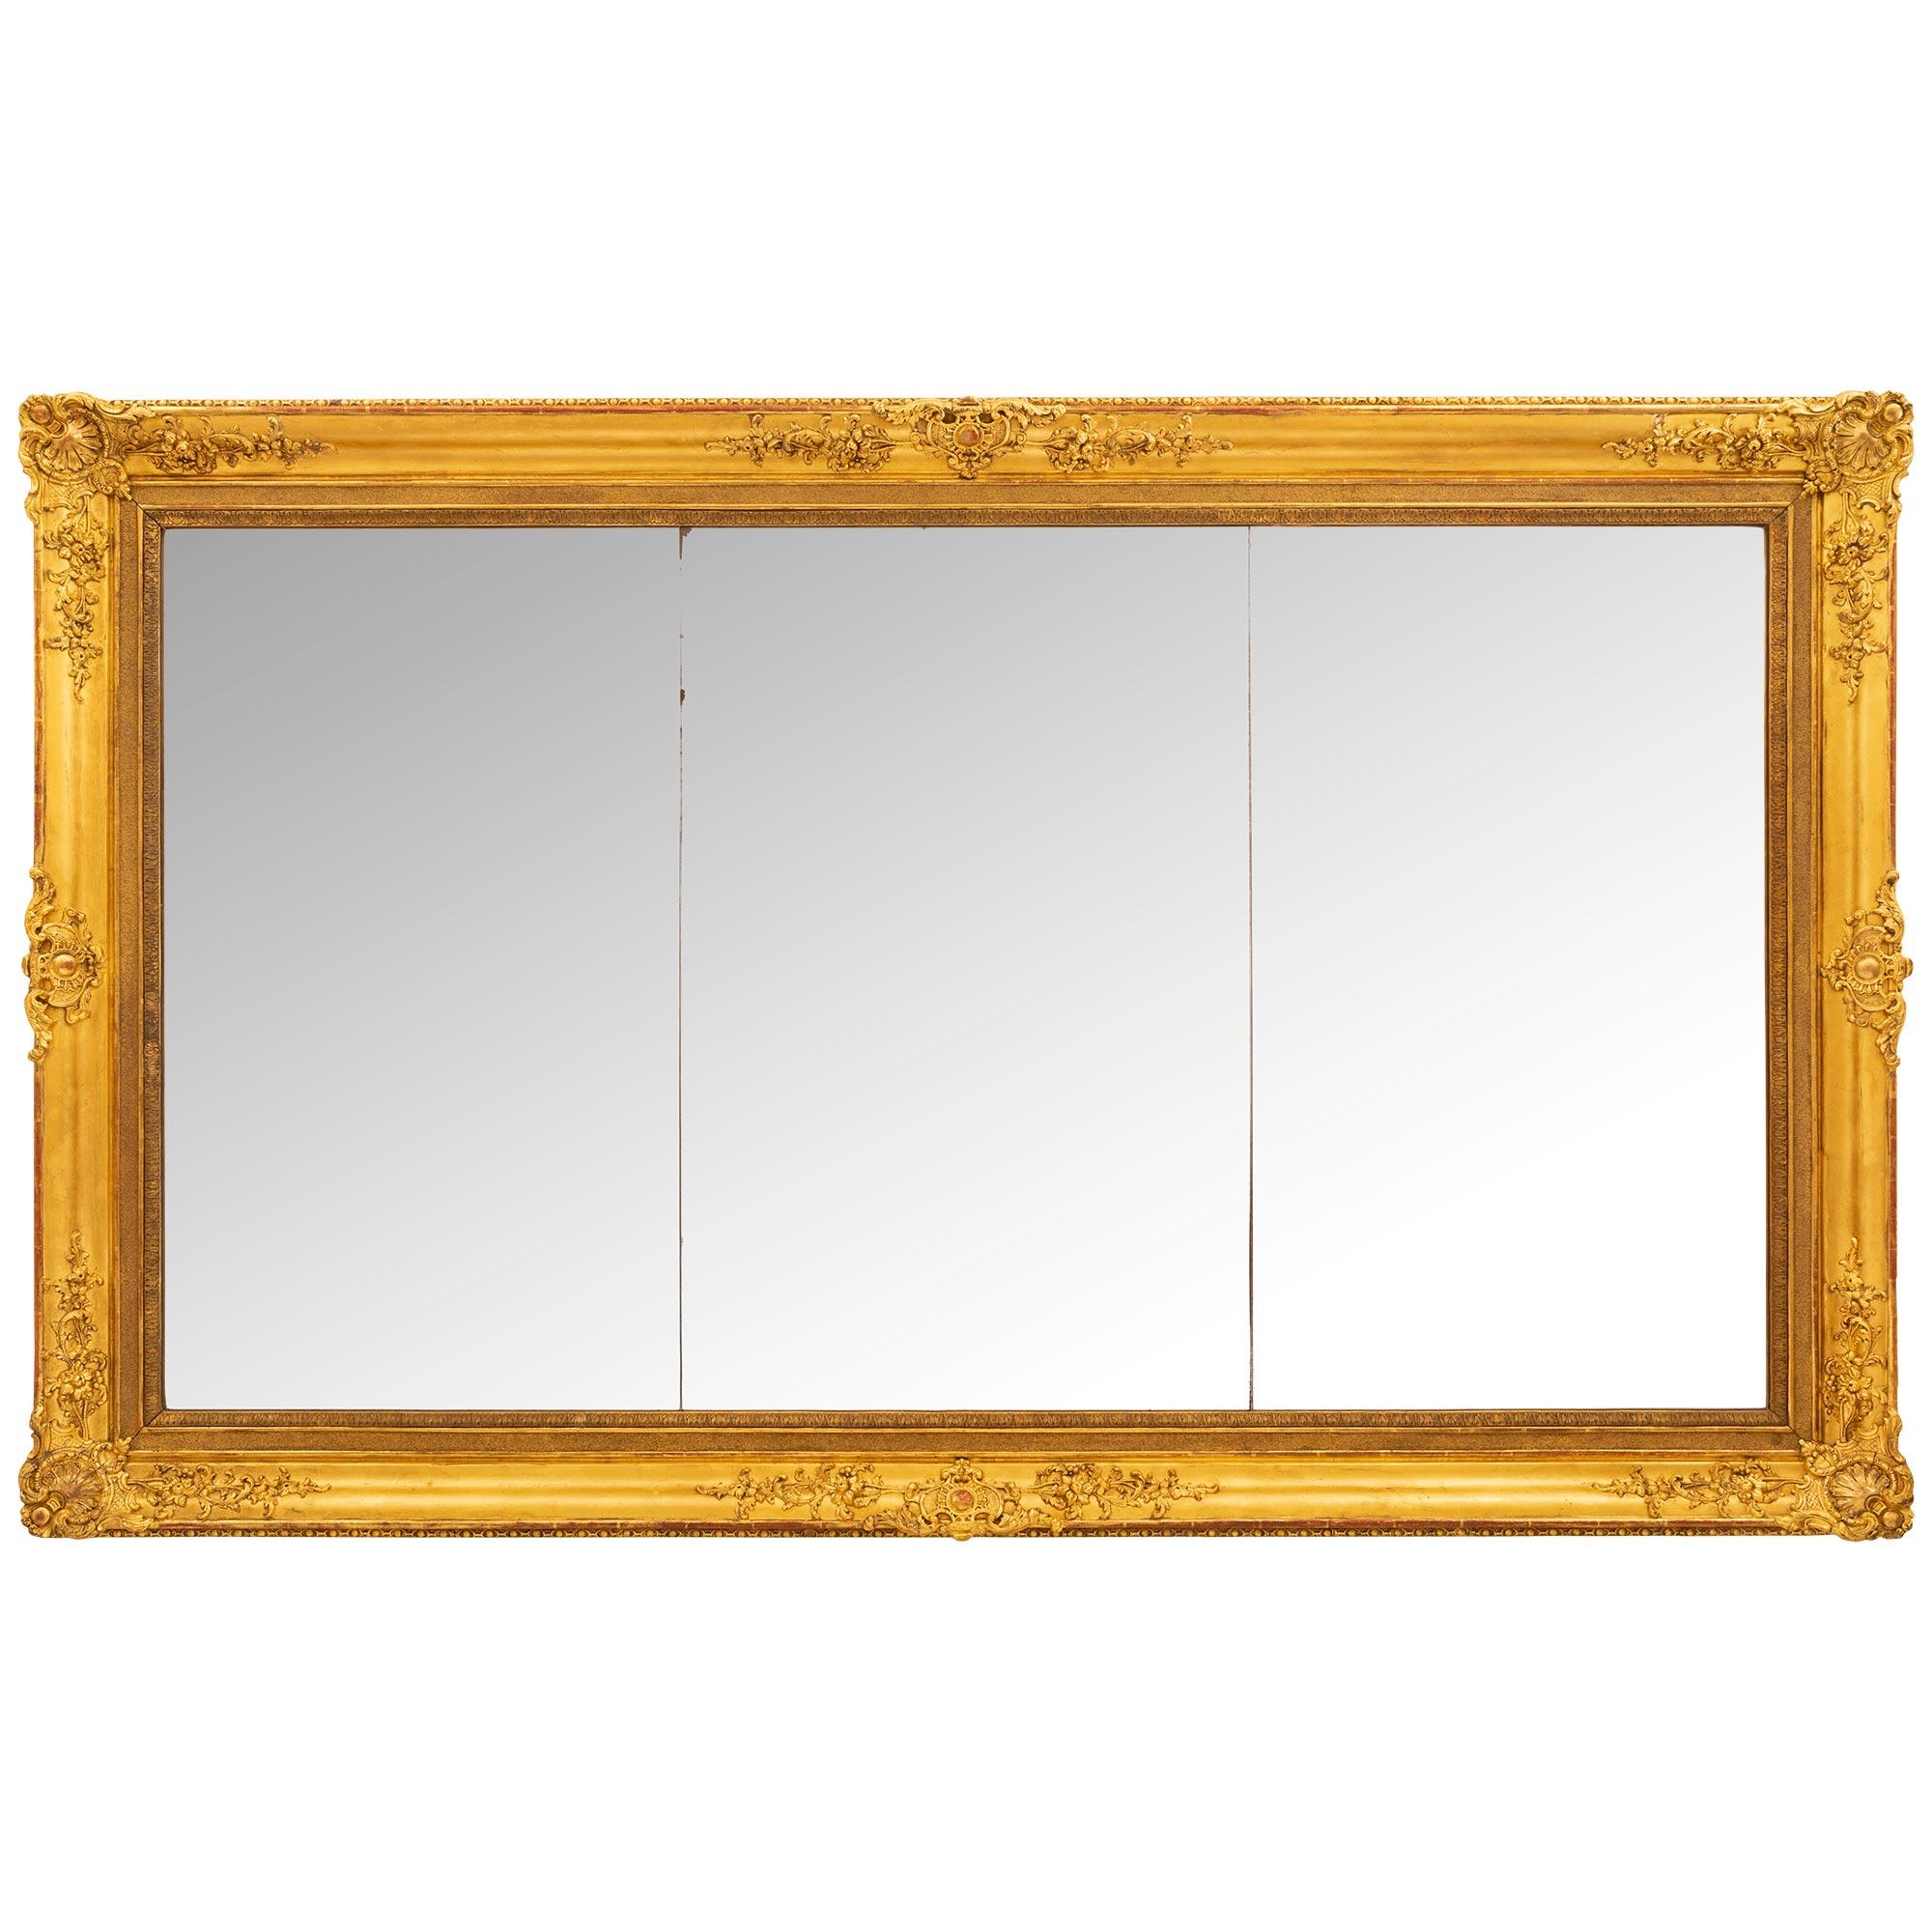 French Mid-19th Century Louis XVI Style Finely Carved Giltwood Mirror For Sale 5